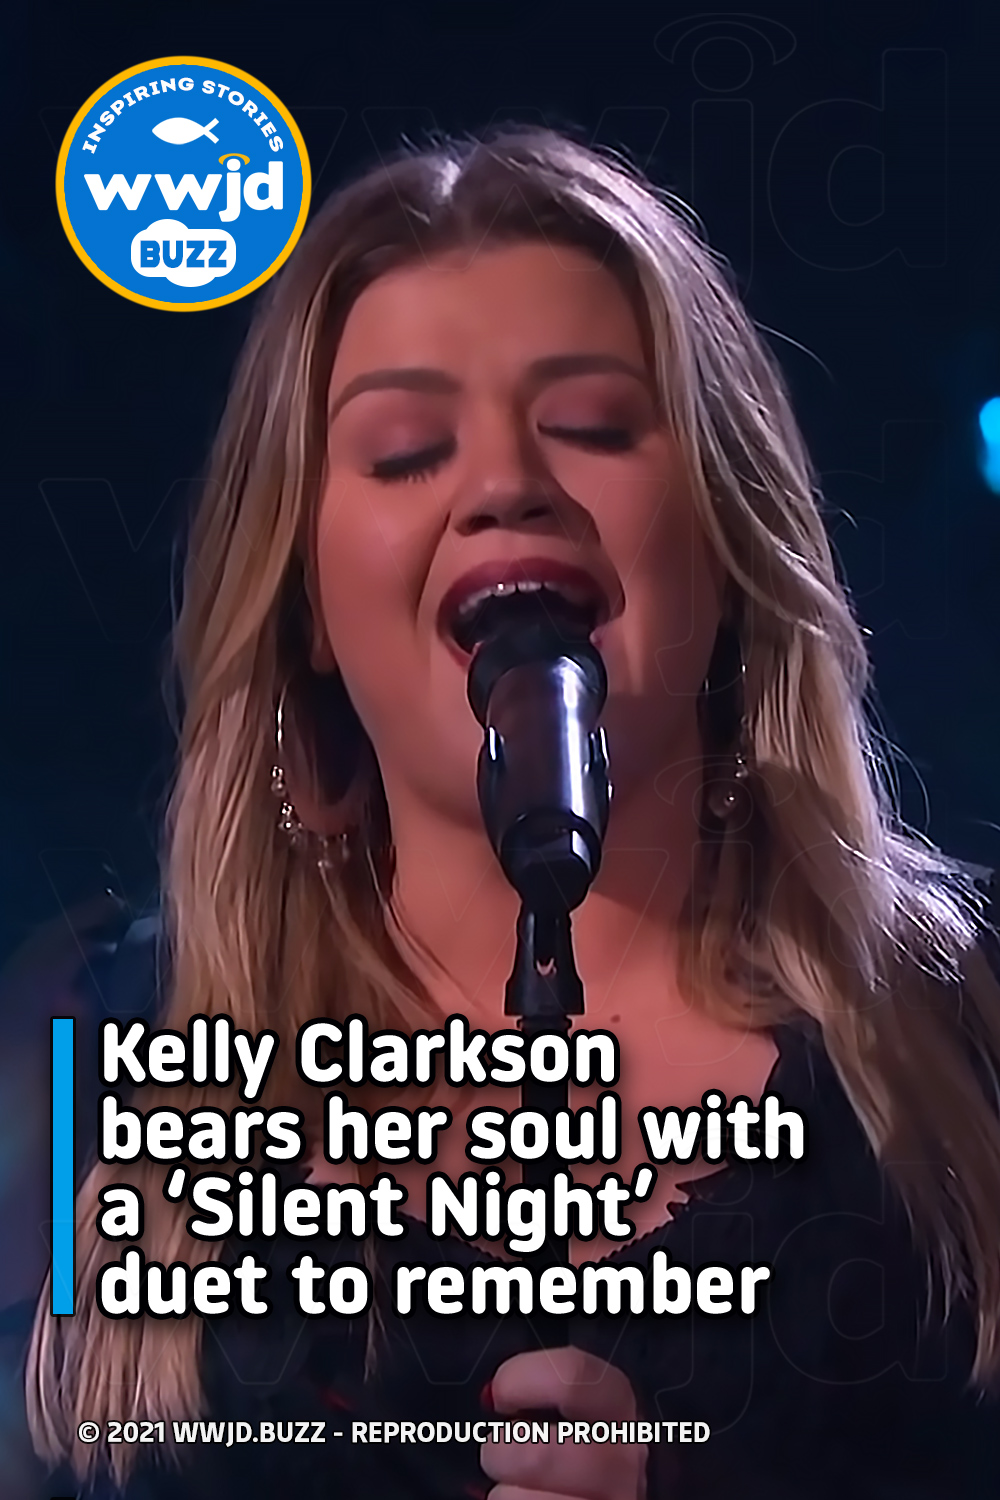 Kelly Clarkson bears her soul with a ‘Silent Night’ duet to remember